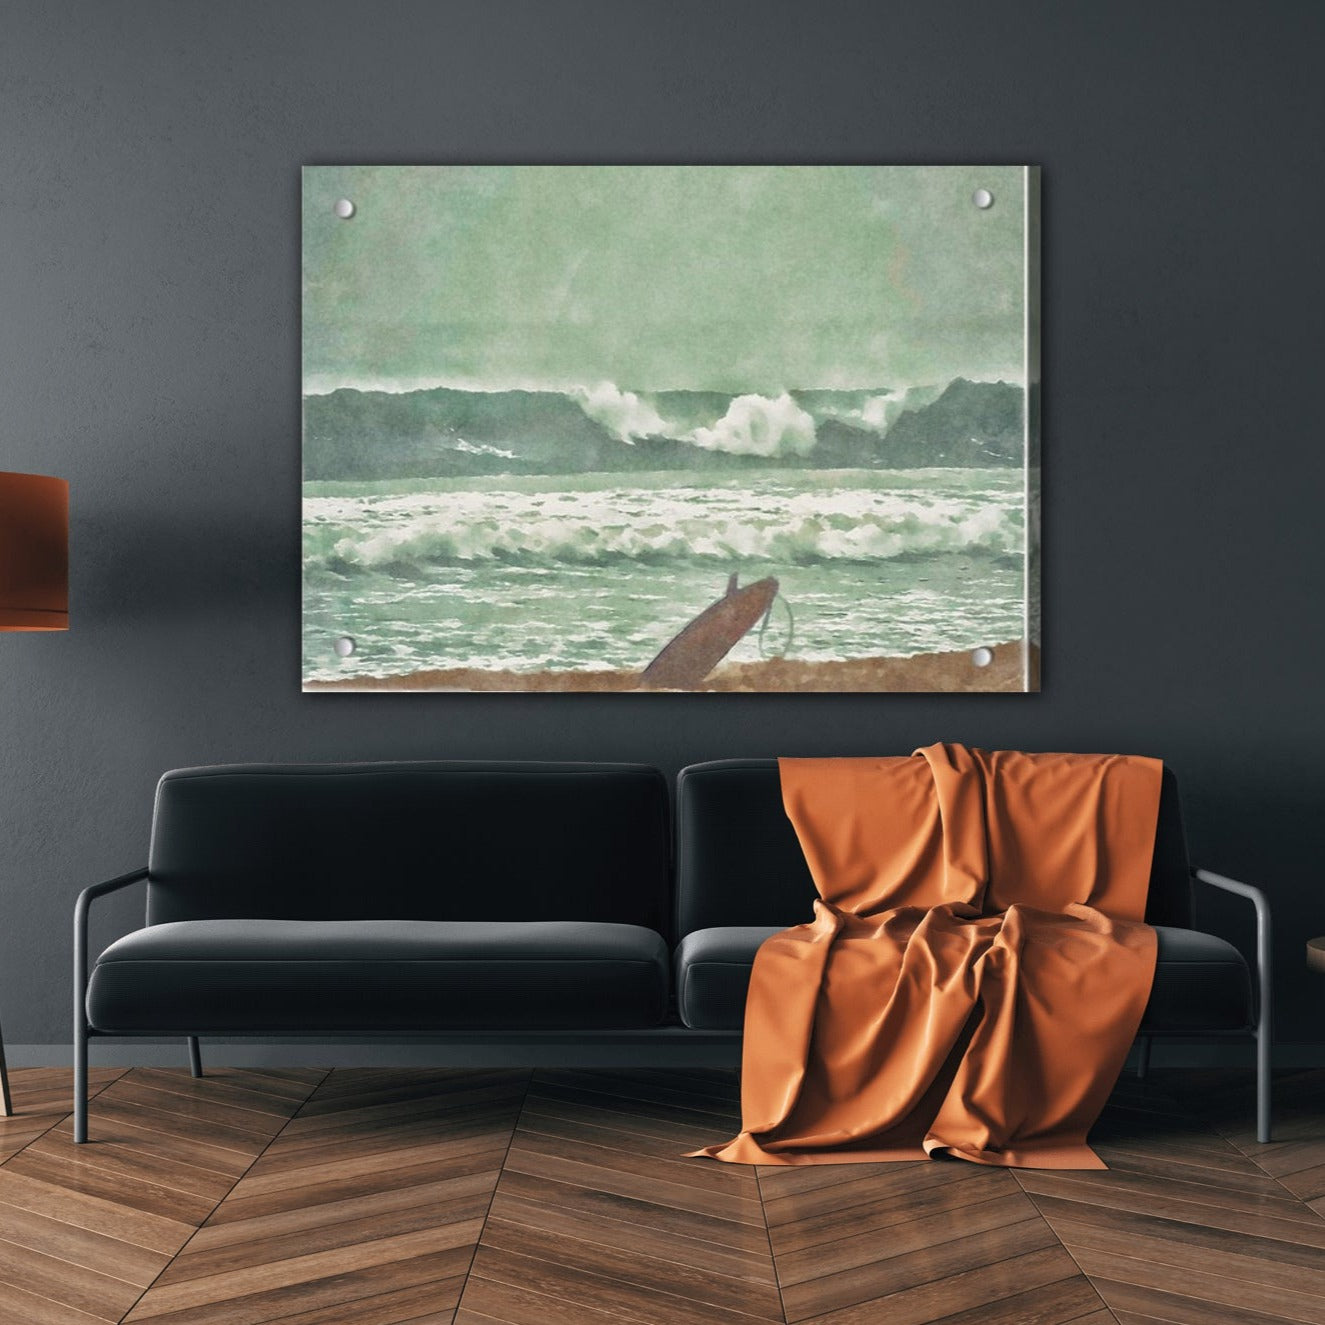 surfboard timeout acrylic print family room decor by jacqueline mb designs